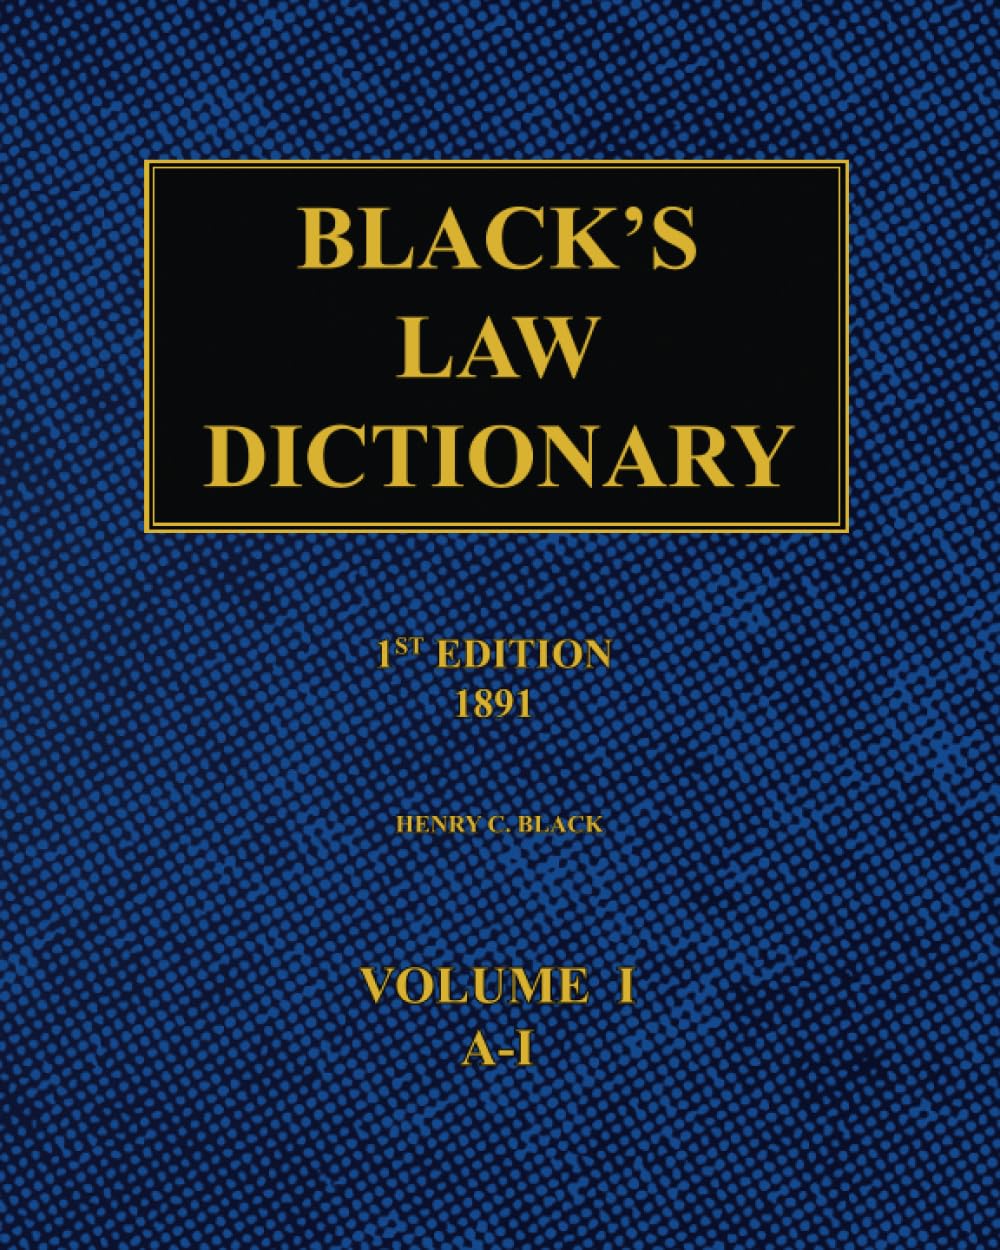 Black's Law Dictionary – 1st Edition (1891): Volume 1